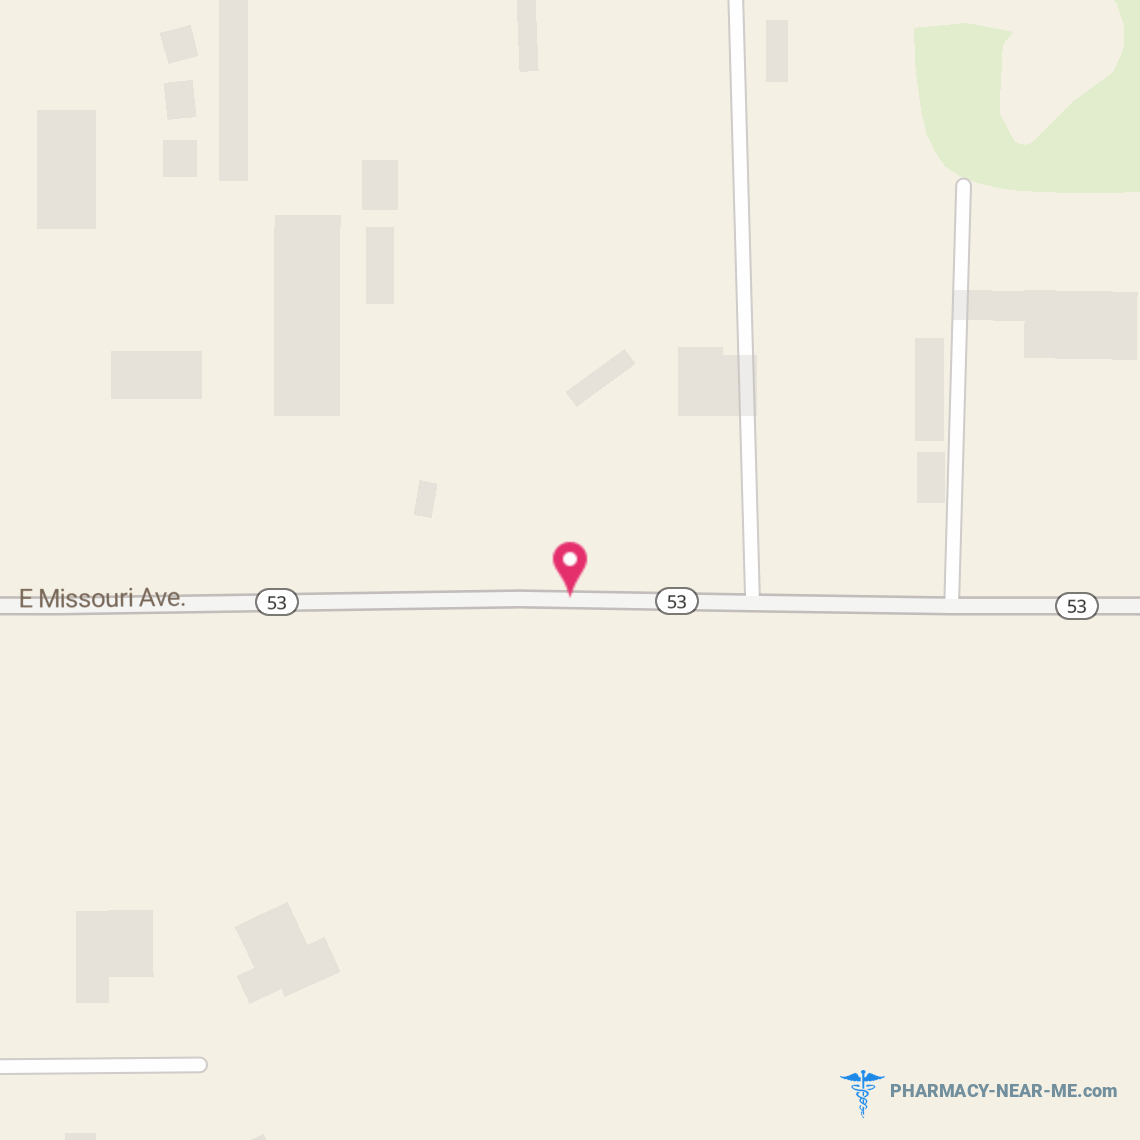 COTTON COUNTY DRUG - Pharmacy Hours, Phone, Reviews & Information: 619 E Missouri St, Walters, Oklahoma 73572, United States